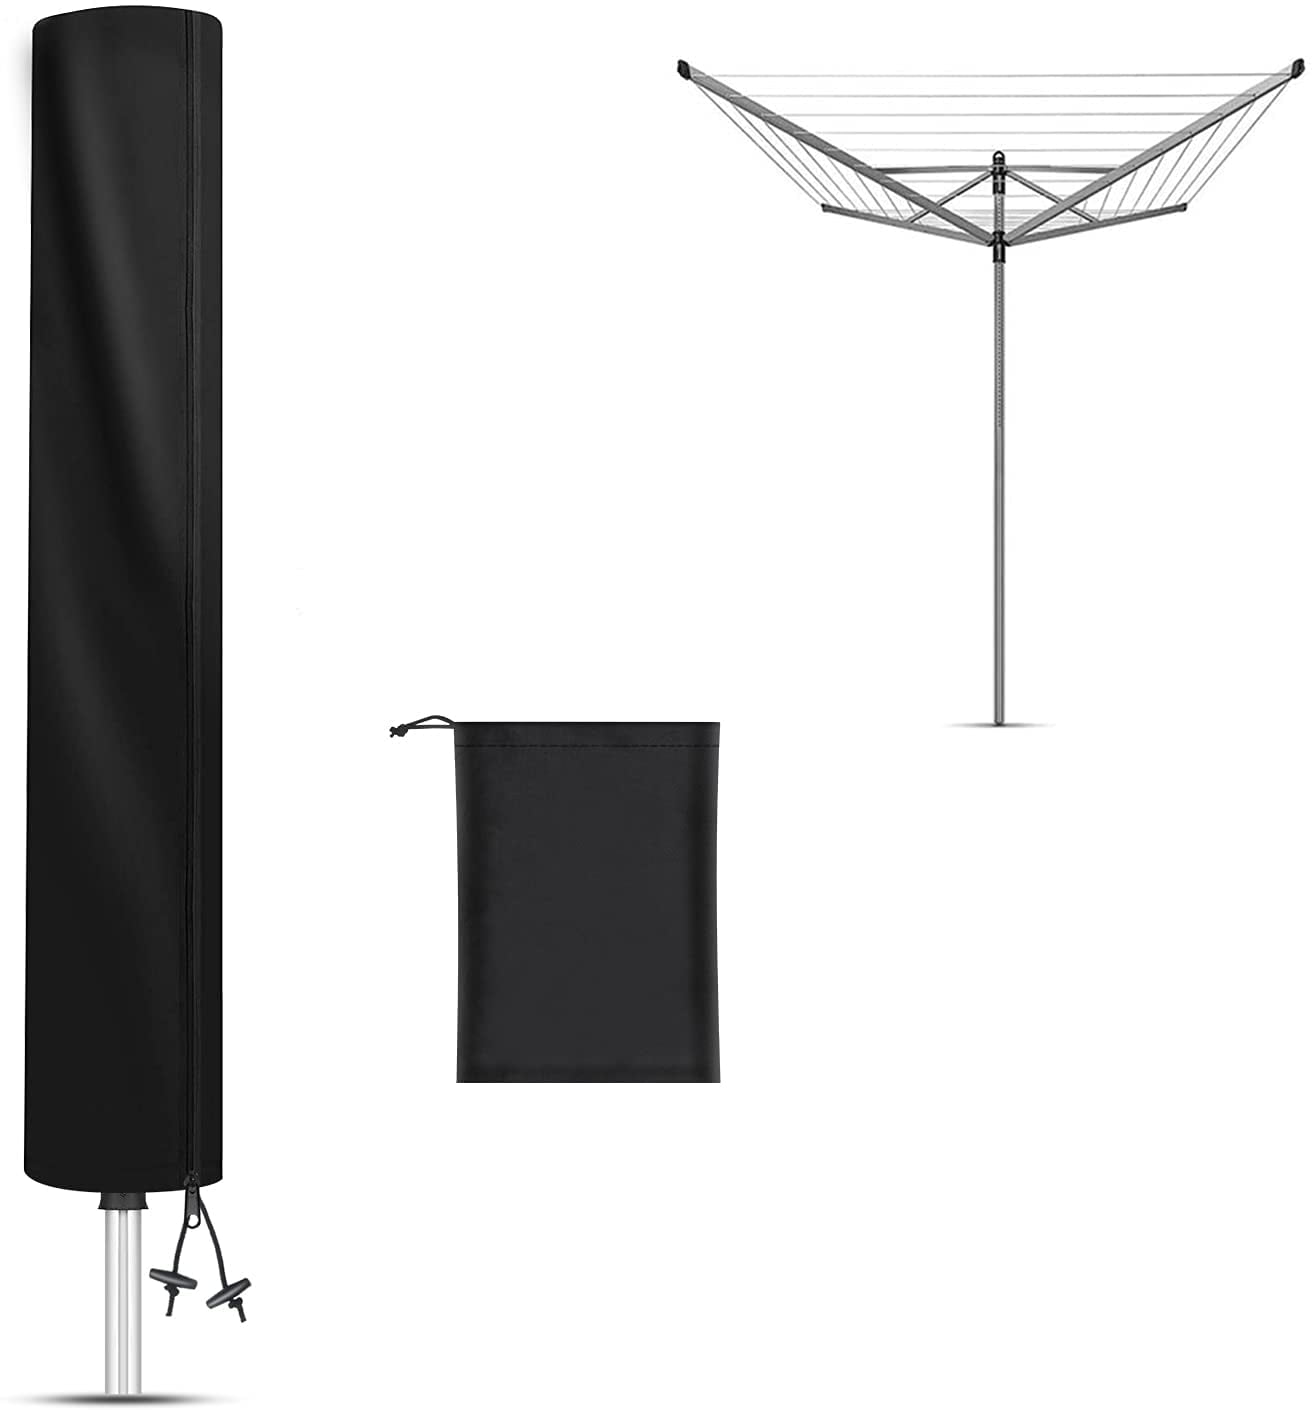 ROTARY WASHING LINE COVER CLOTHES AIRER DRIER PROTECT PARASOL GARDEN WATERPROOF 